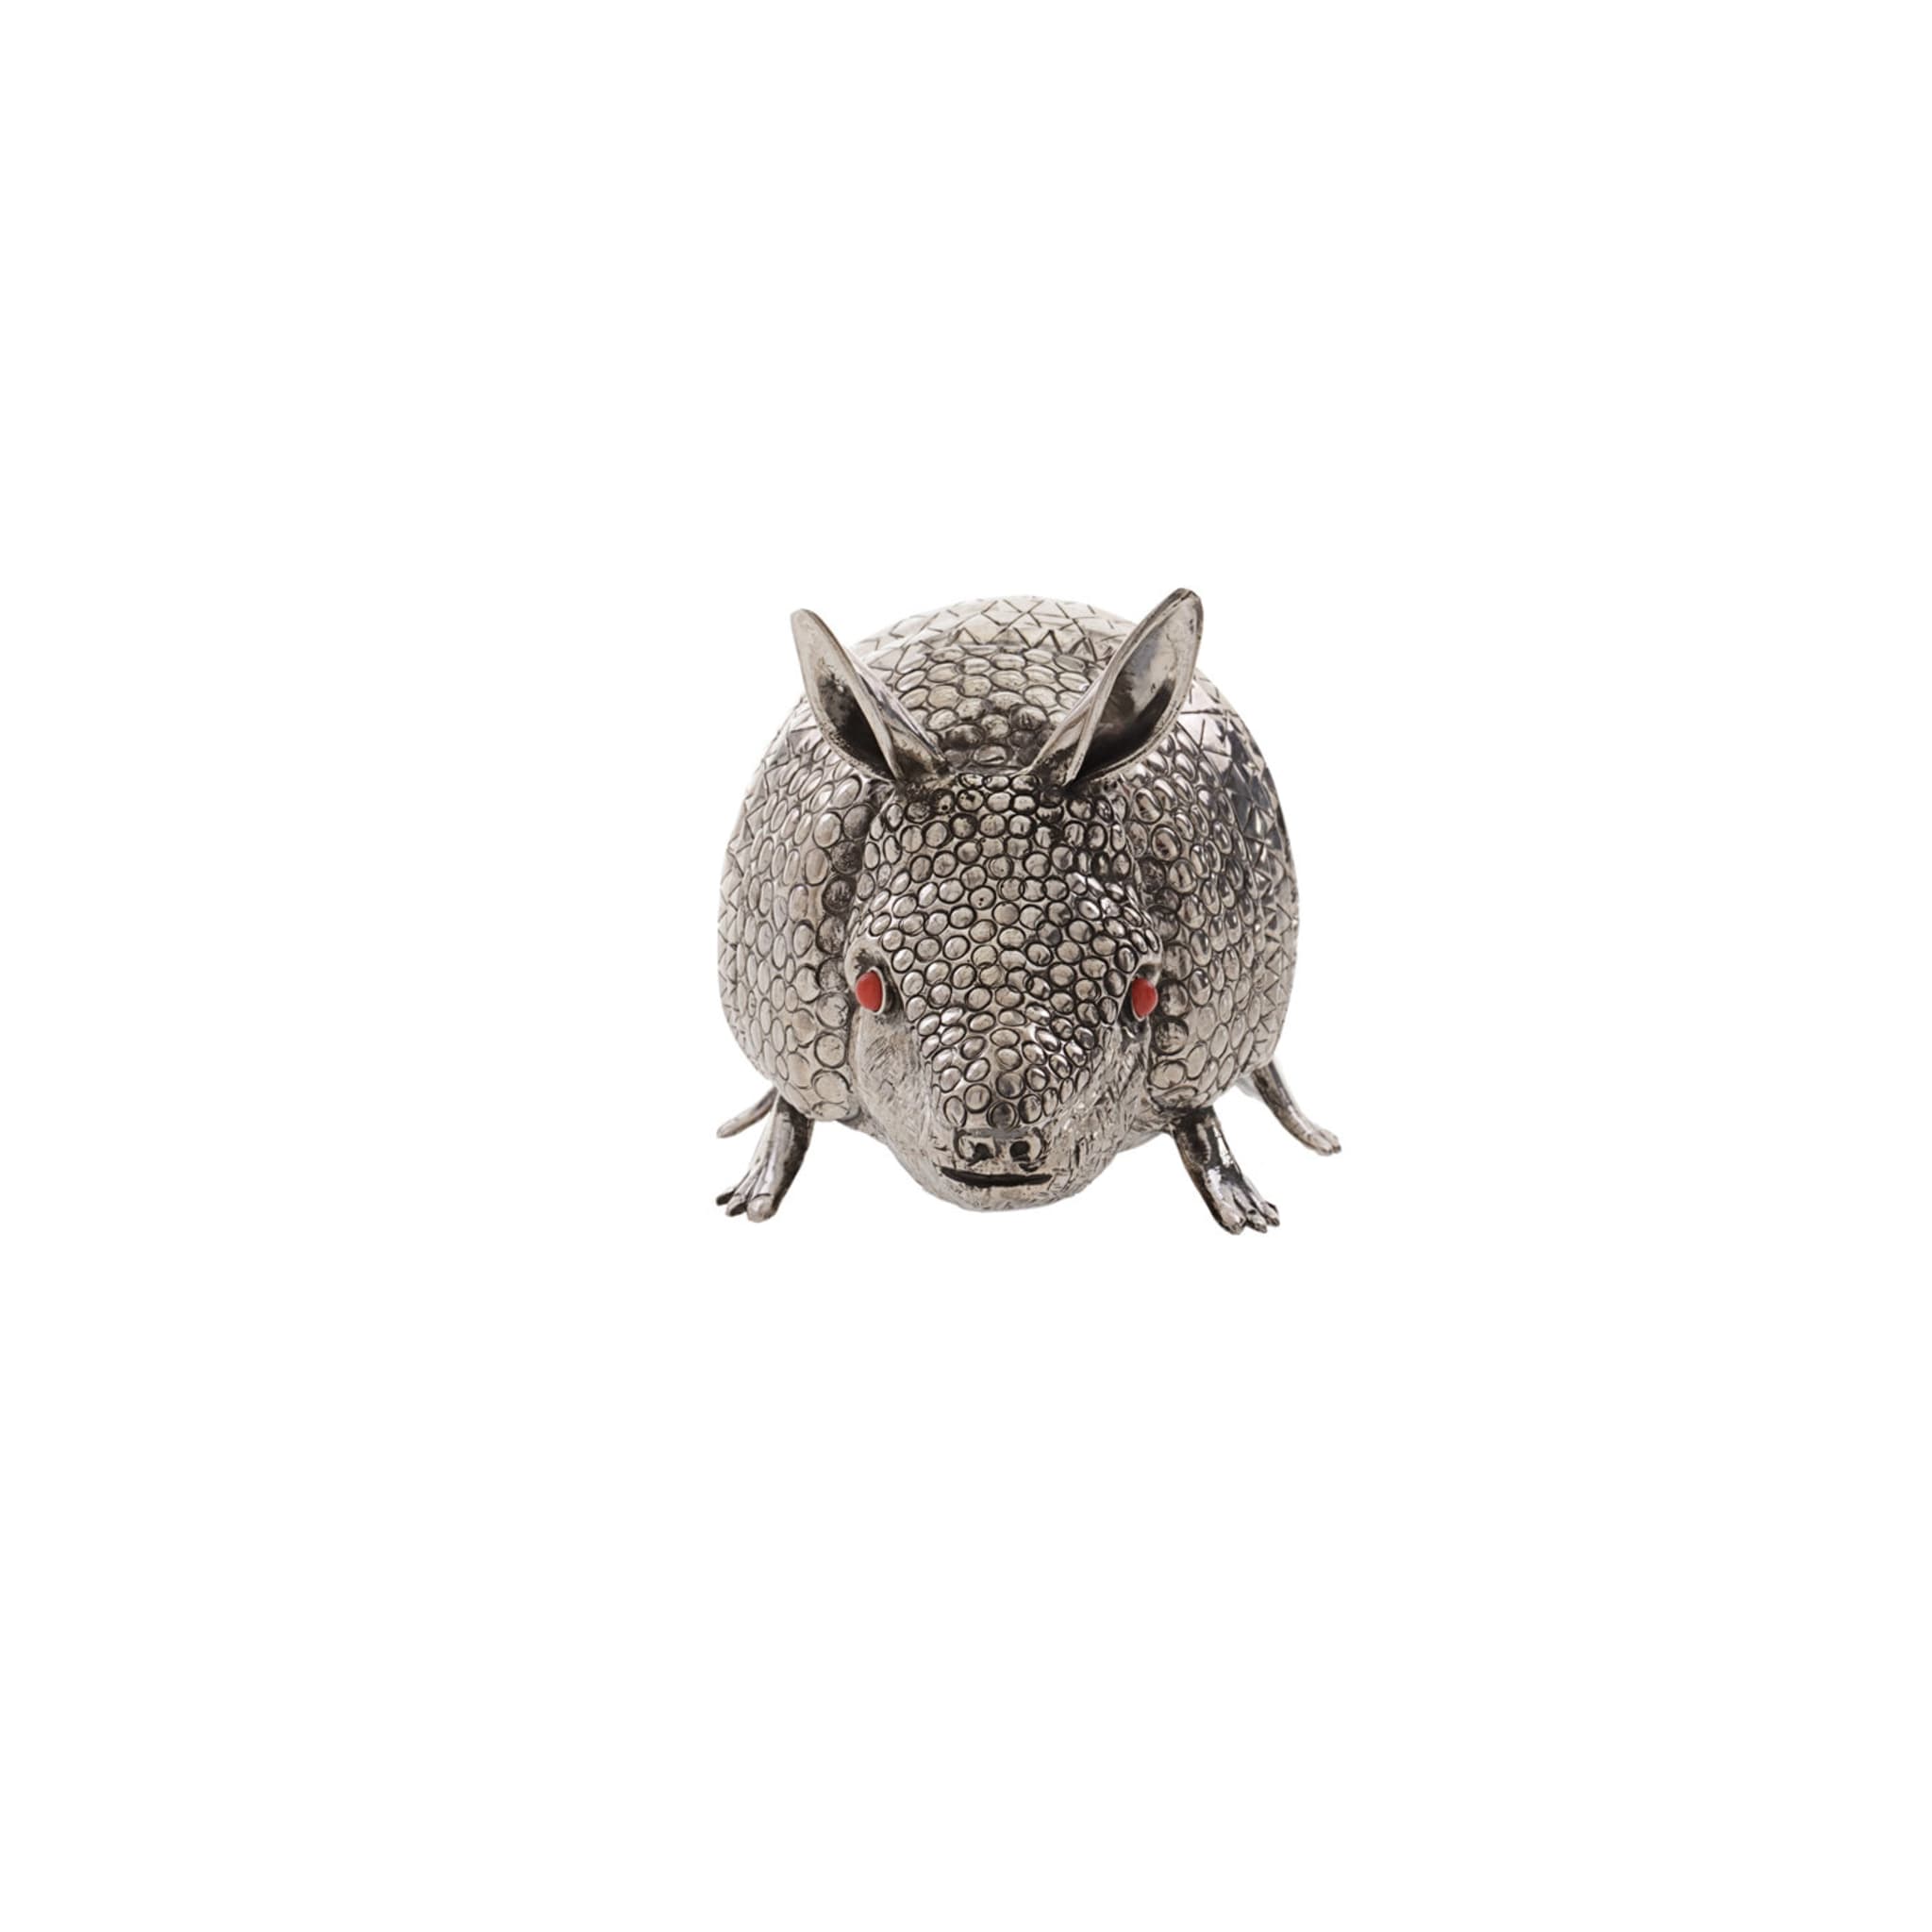 The Armadillo Sterling Silver Lighter - Alternative view 2